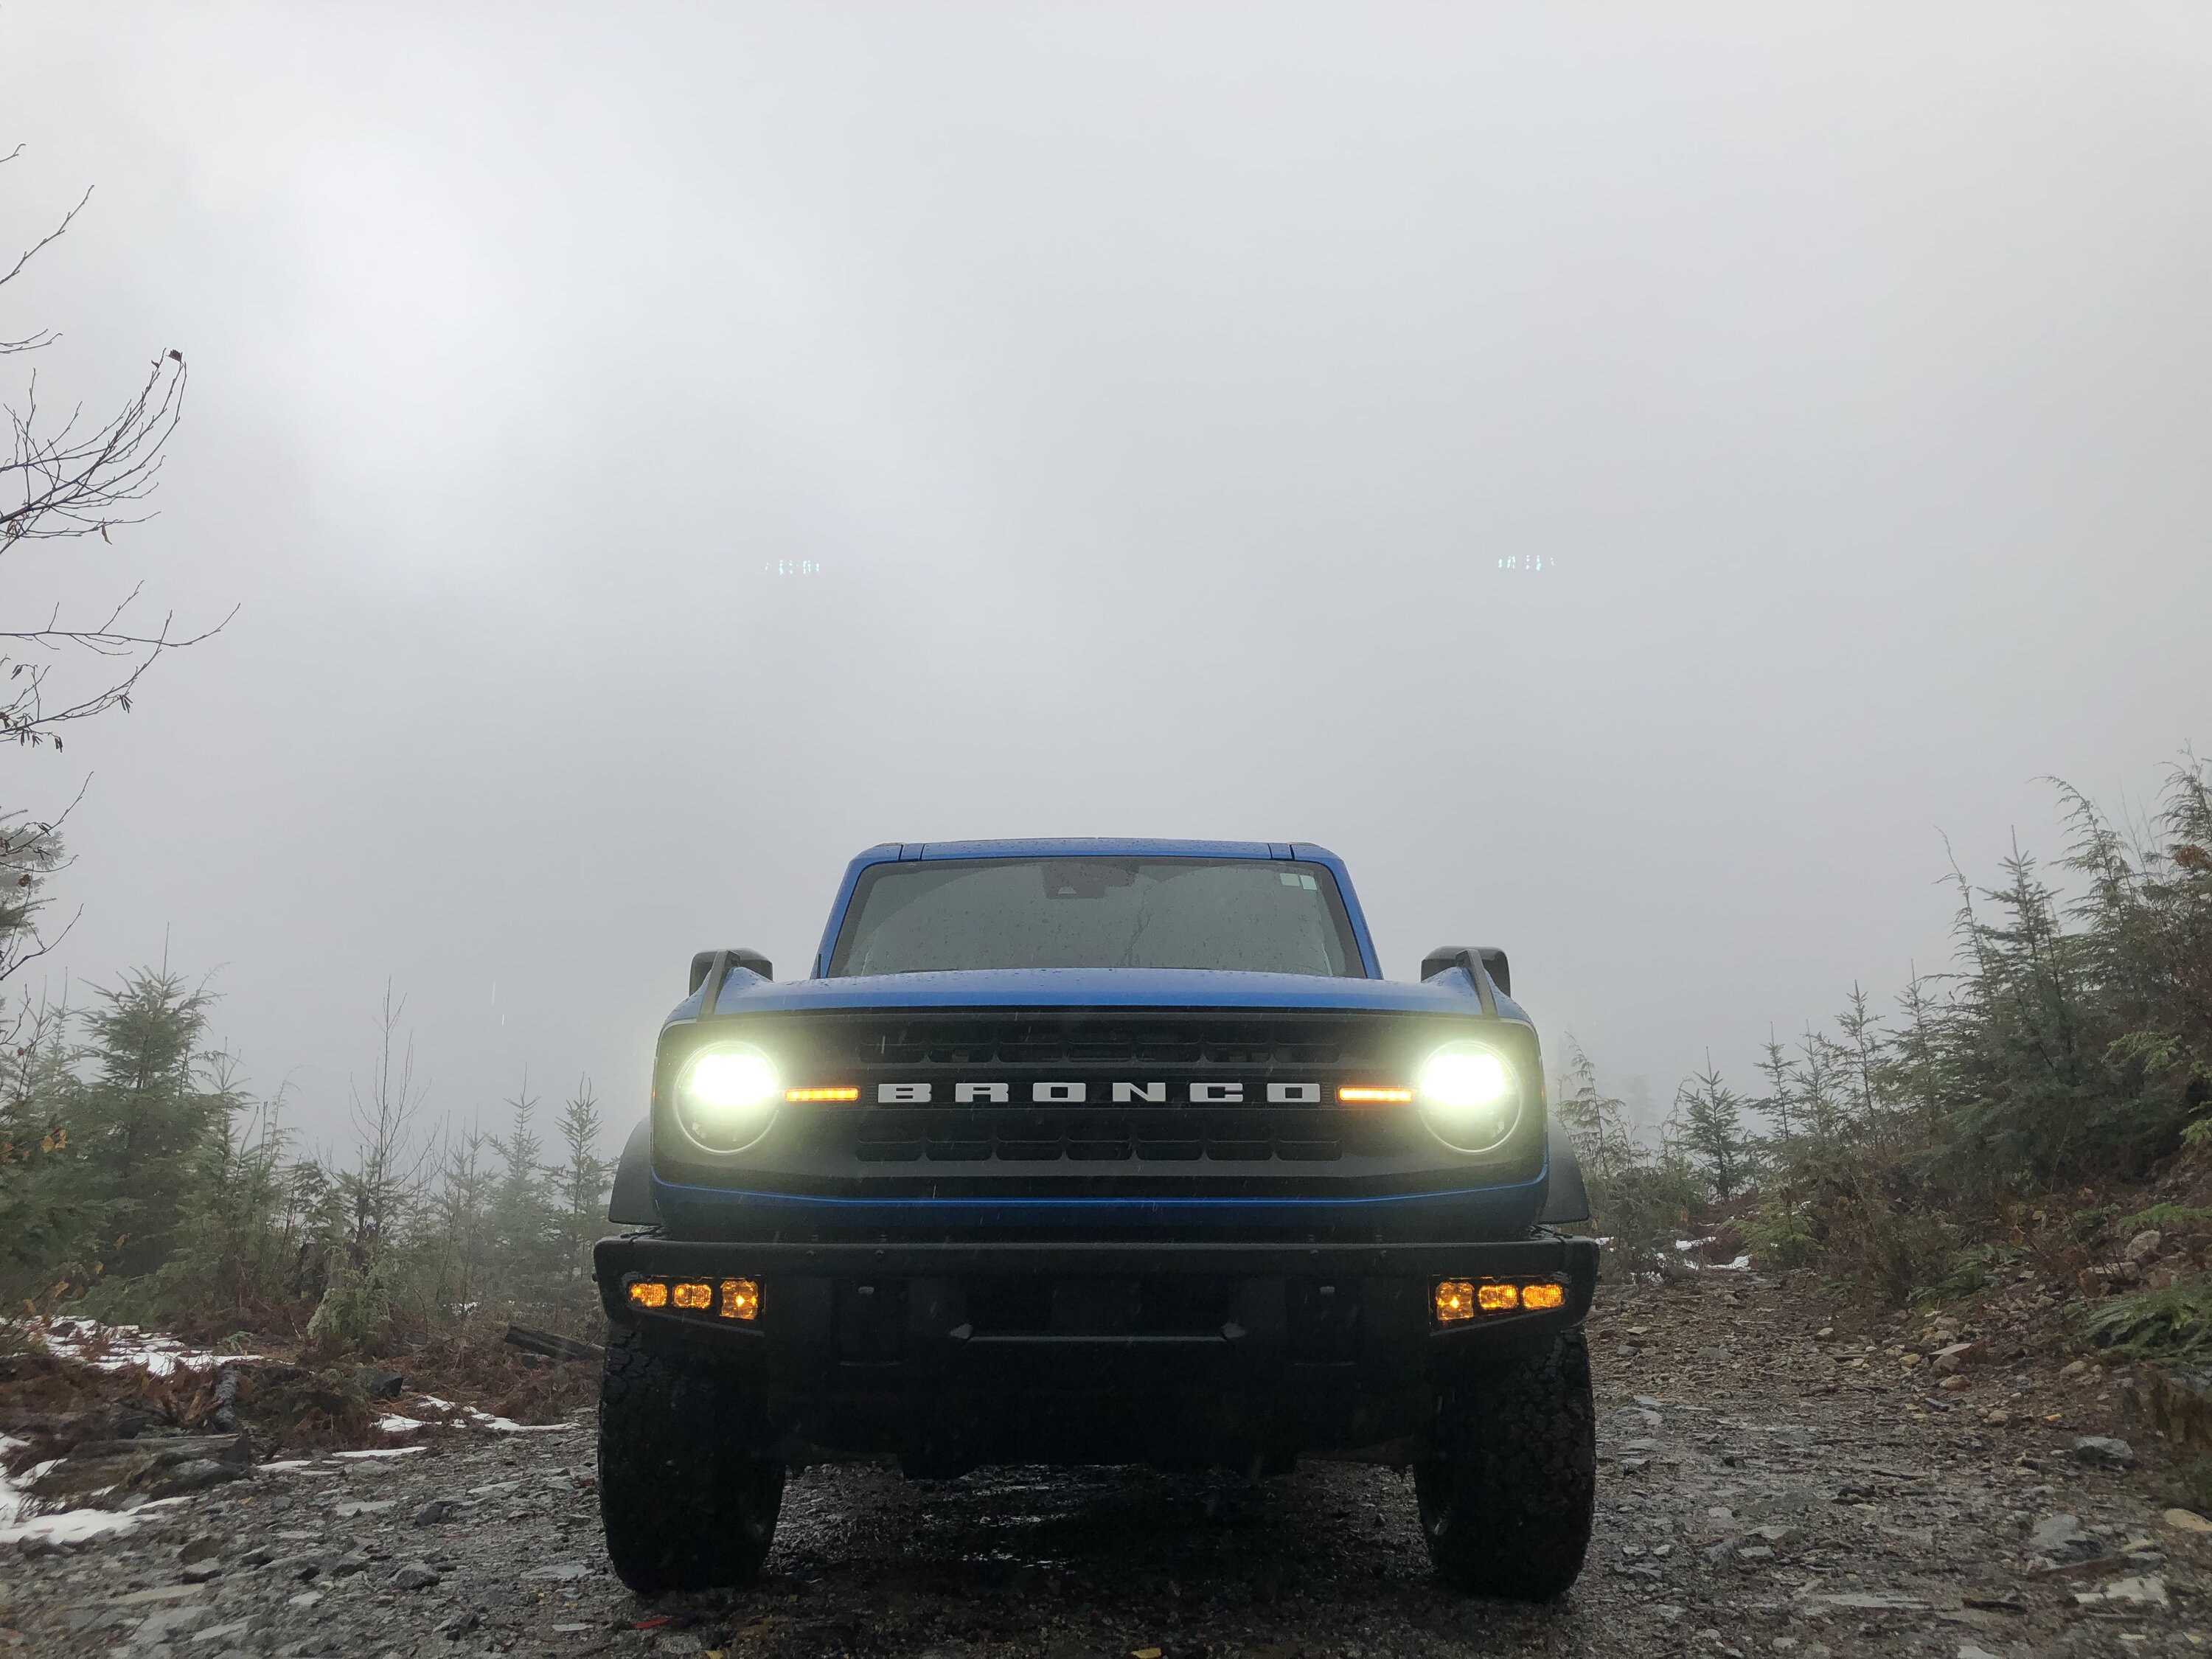 Ford Bronco What’s your pick for Modular bumper fog lights? IMG_2896